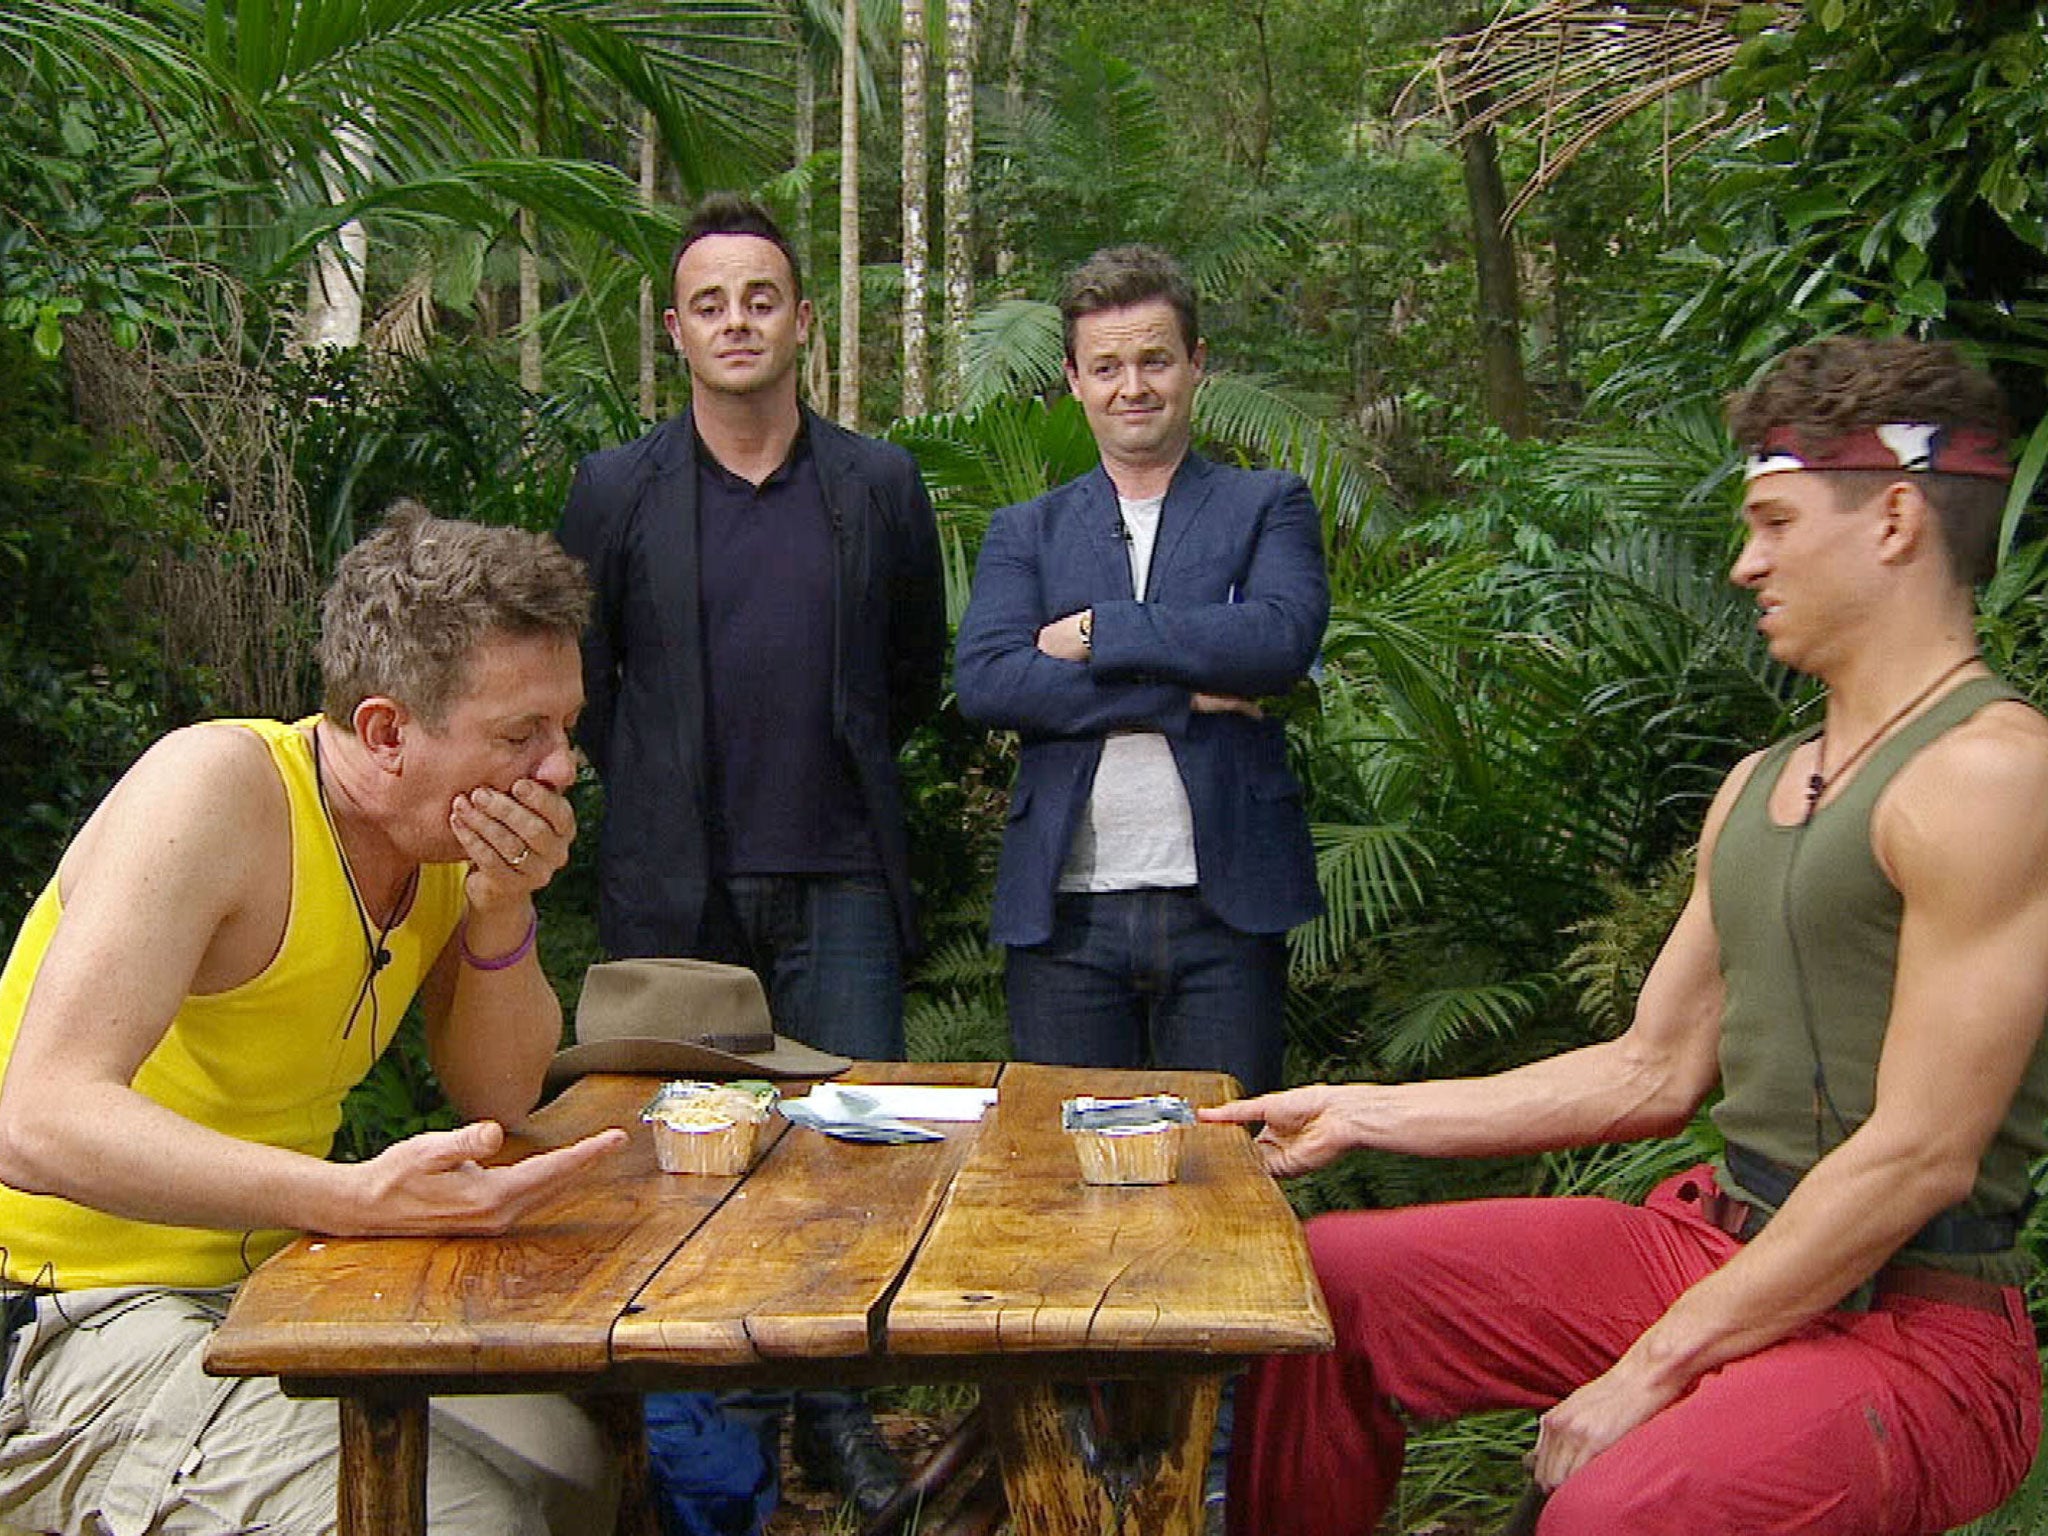 Matthew Wright and Joey Essex during the Bushtucker Trial